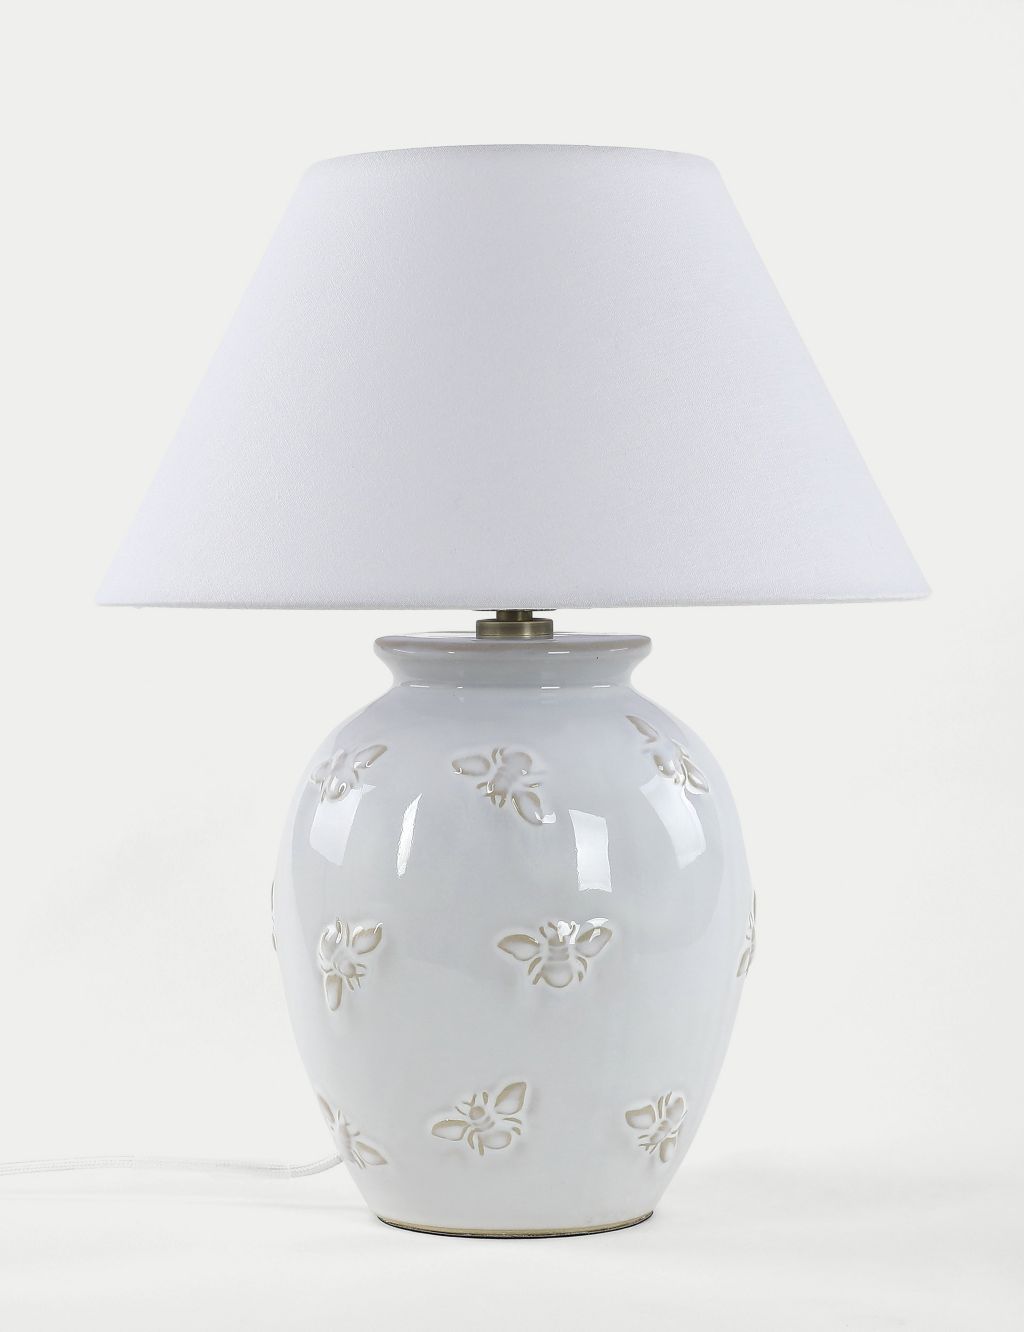 Bonnie Bee Table Lamp